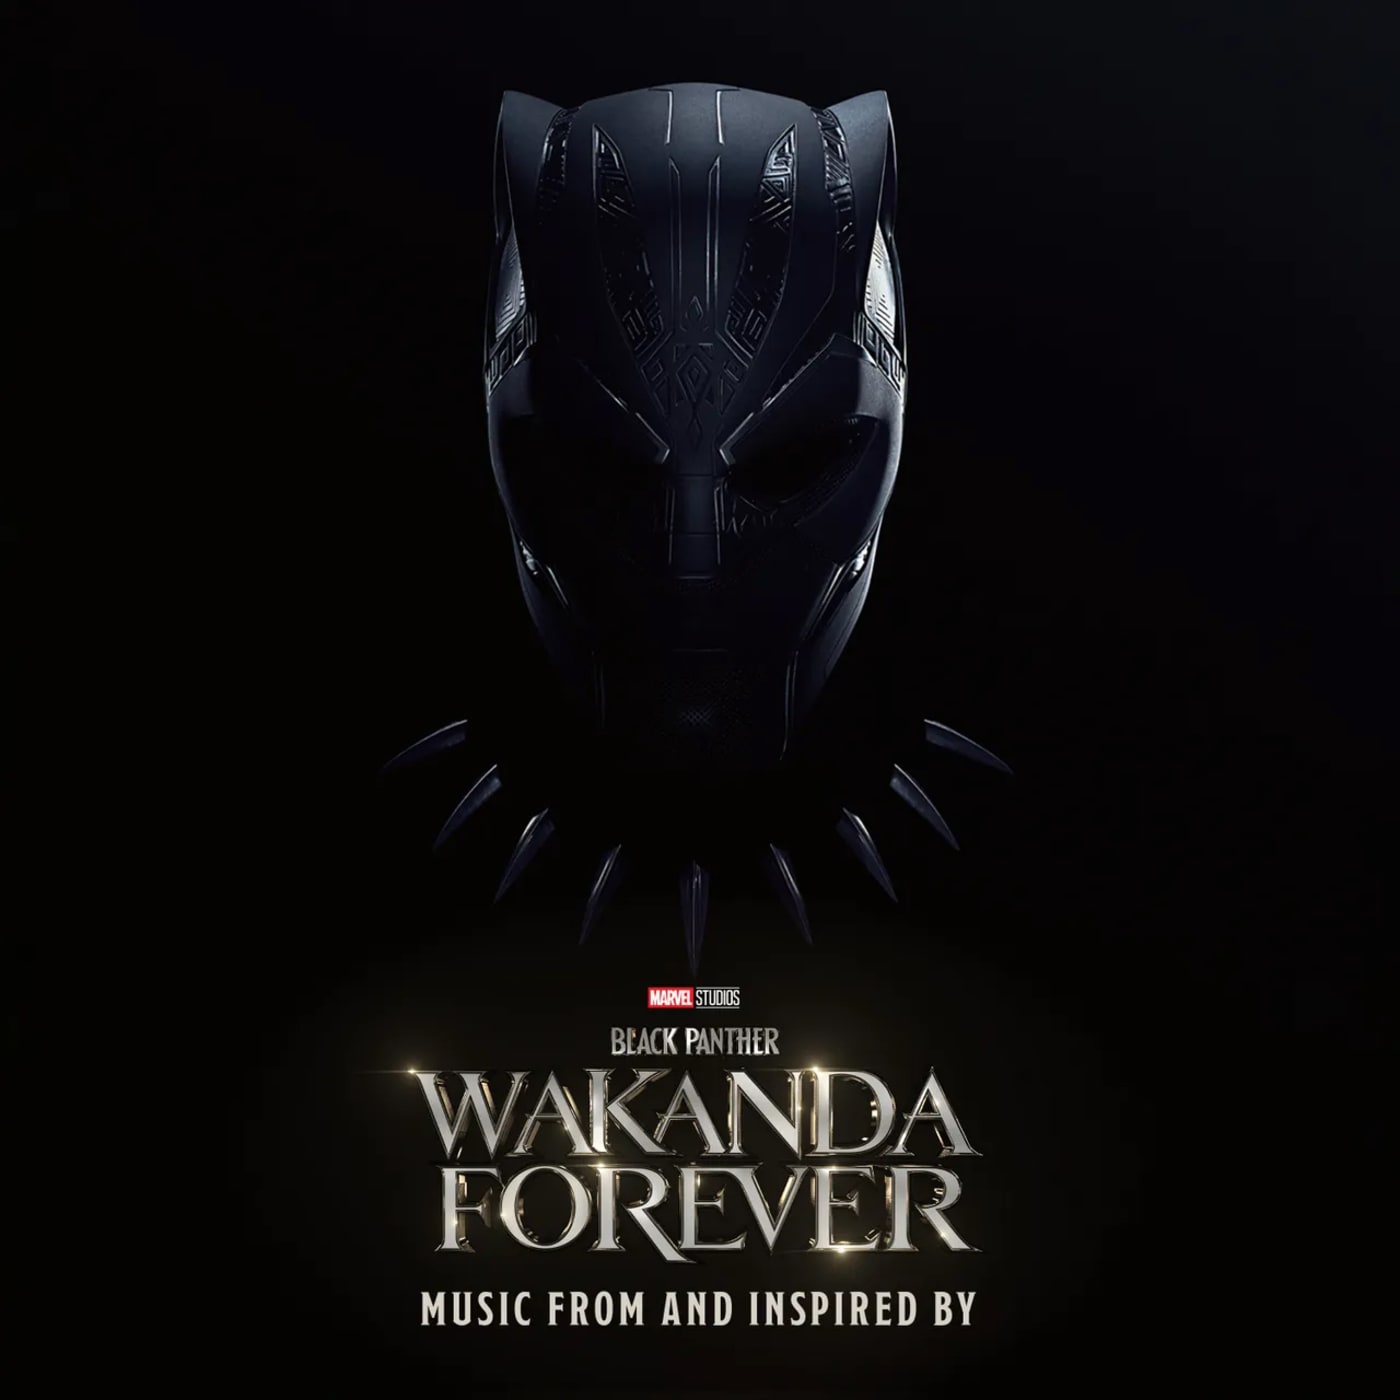 The cover art for the 'Wakanda Forever' soundtrack